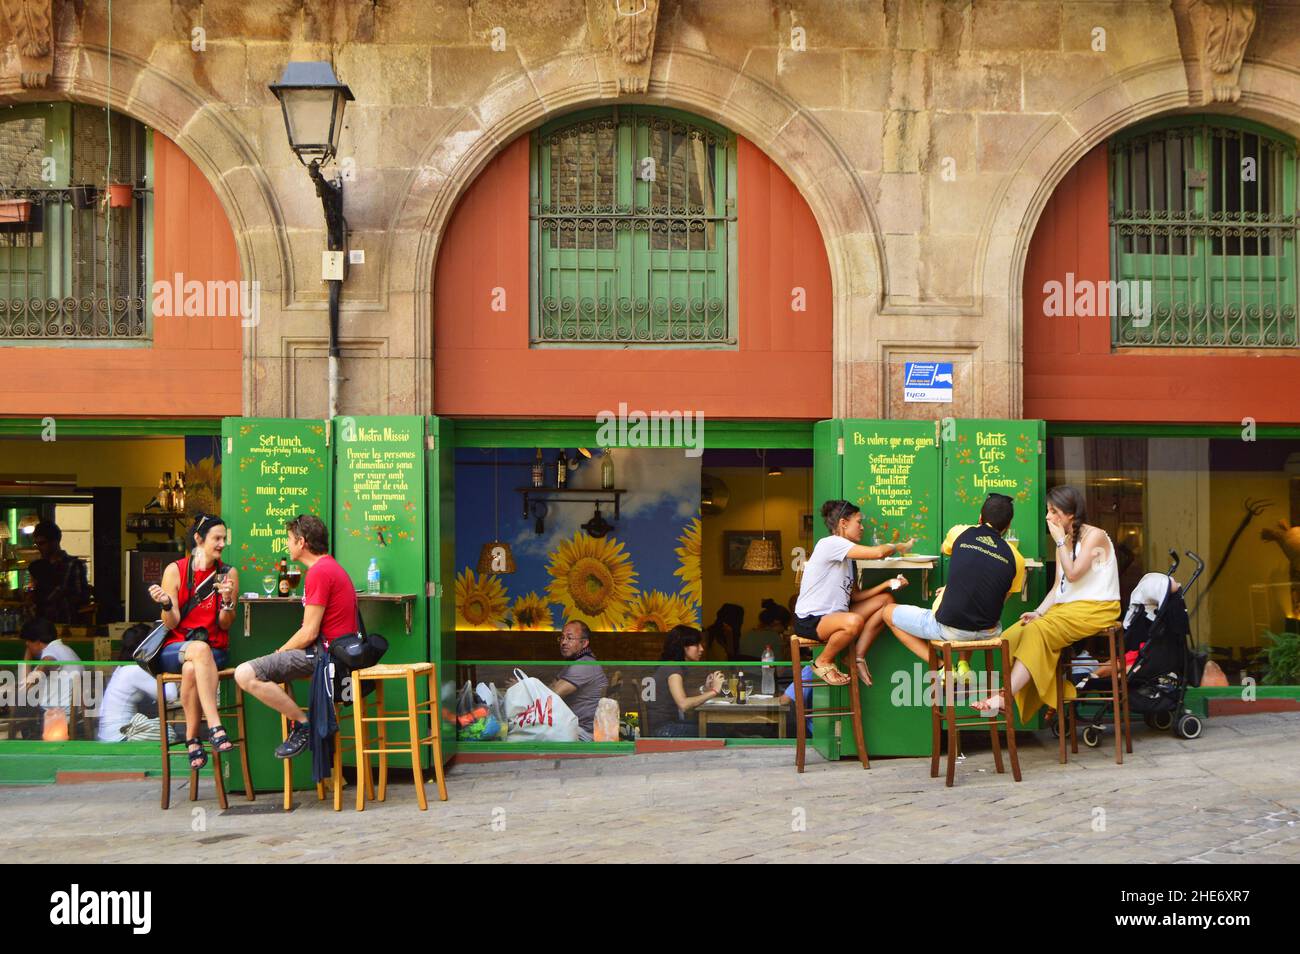 People sitting outside cafe restaurant in Barri Gotic district of Barcelona Spain. Stock Photo